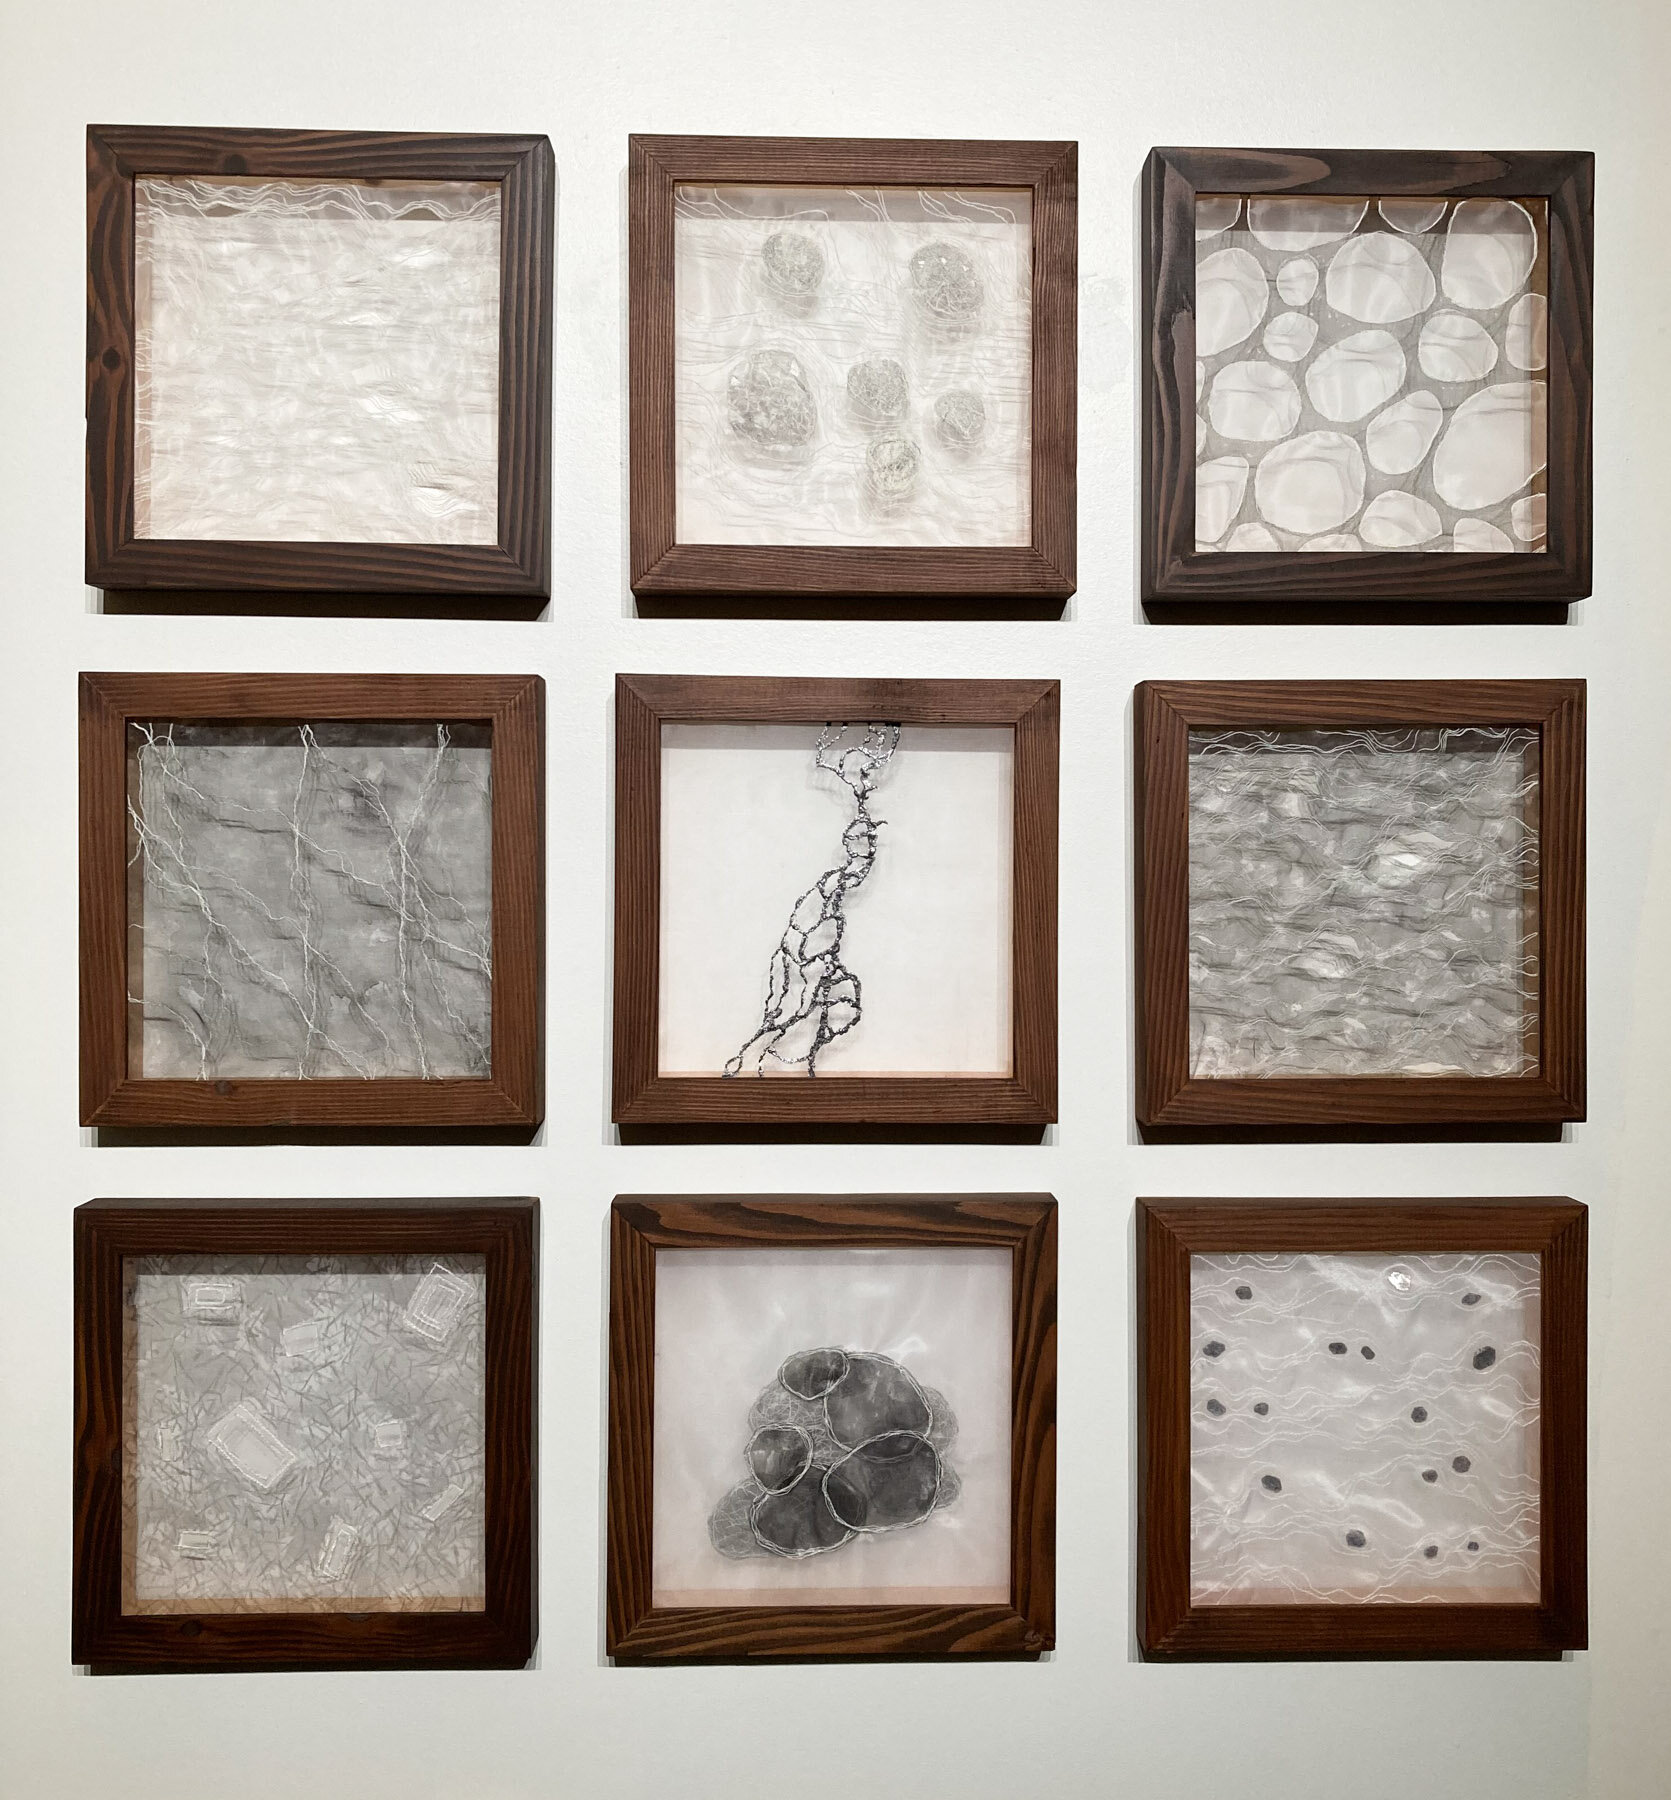 FRAMED PANELS - silk organza, thread, ink, graphite flake and muscovite crystals 11"x11" each